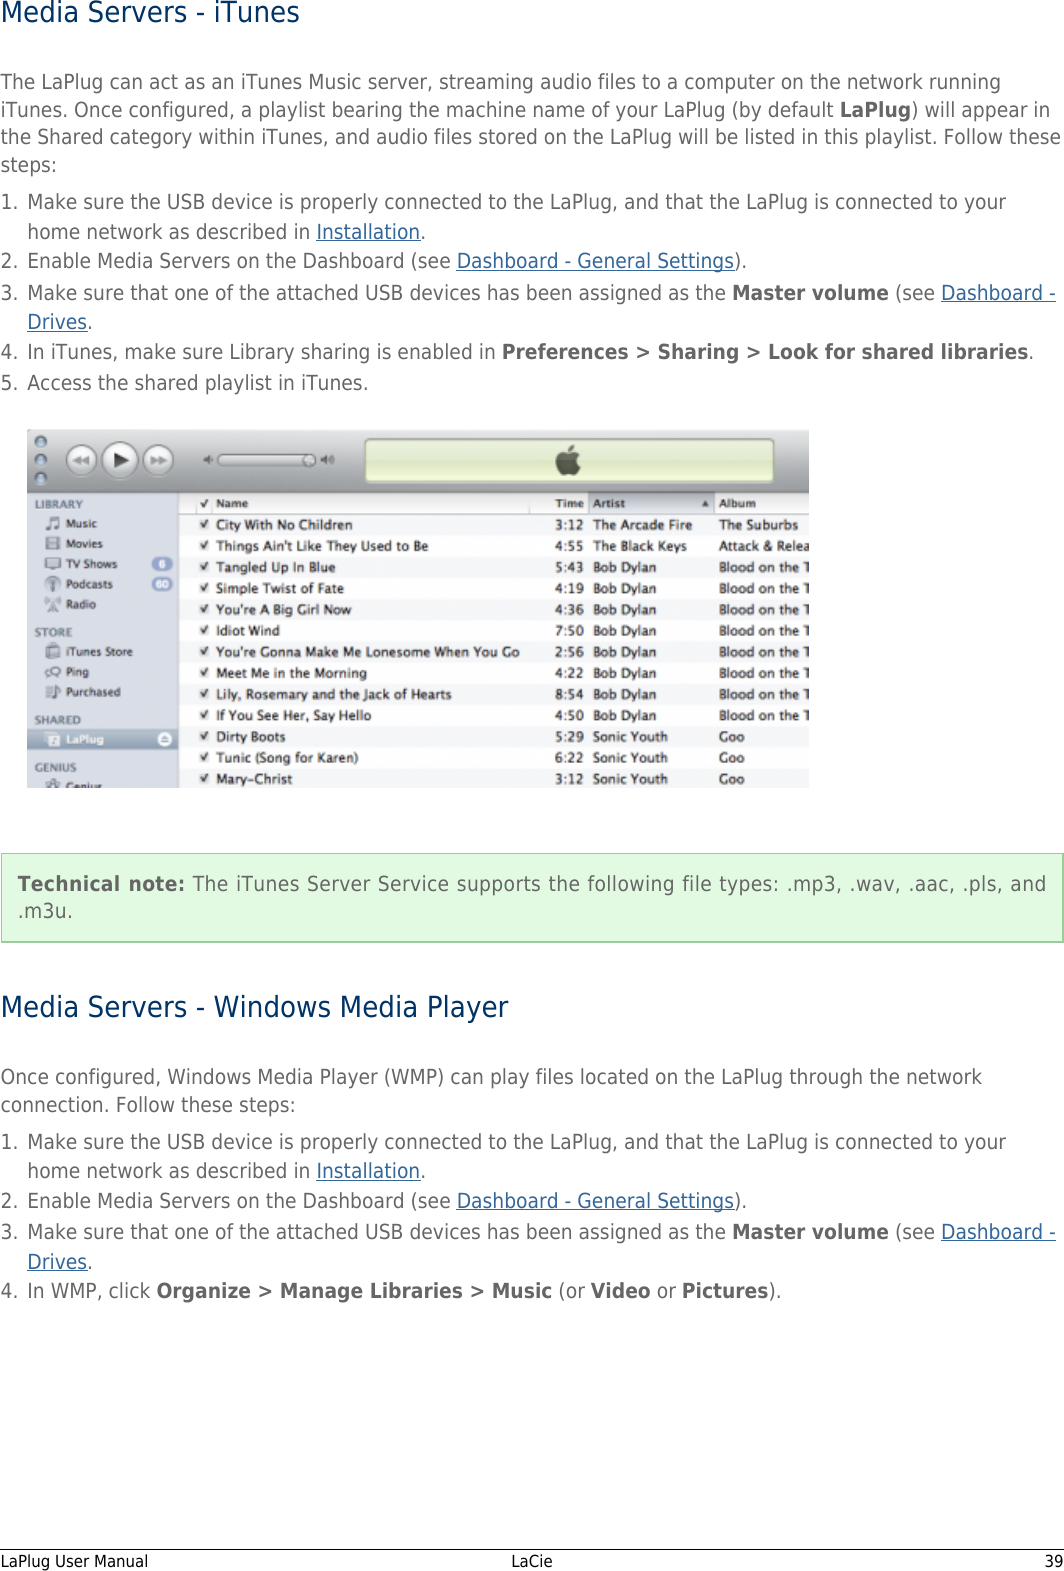 Media Servers - iTunesThe LaPlug can act as an iTunes Music server, streaming audio files to a computer on the network runningiTunes. Once configured, a playlist bearing the machine name of your LaPlug (by default LaPlug) will appear inthe Shared category within iTunes, and audio files stored on the LaPlug will be listed in this playlist. Follow thesesteps:Make sure the USB device is properly connected to the LaPlug, and that the LaPlug is connected to your1.home network as described in Installation.Enable Media Servers on the Dashboard (see Dashboard - General Settings).2.Make sure that one of the attached USB devices has been assigned as the Master volume (see Dashboard -3.Drives.In iTunes, make sure Library sharing is enabled in Preferences &gt; Sharing &gt; Look for shared libraries.4.Access the shared playlist in iTunes.5.Technical note: The iTunes Server Service supports the following file types: .mp3, .wav, .aac, .pls, and.m3u.Media Servers - Windows Media PlayerOnce configured, Windows Media Player (WMP) can play files located on the LaPlug through the networkconnection. Follow these steps:Make sure the USB device is properly connected to the LaPlug, and that the LaPlug is connected to your1.home network as described in Installation.Enable Media Servers on the Dashboard (see Dashboard - General Settings).2.Make sure that one of the attached USB devices has been assigned as the Master volume (see Dashboard -3.Drives.In WMP, click Organize &gt; Manage Libraries &gt; Music (or Video or Pictures).4.LaPlug User Manual   LaCie   39